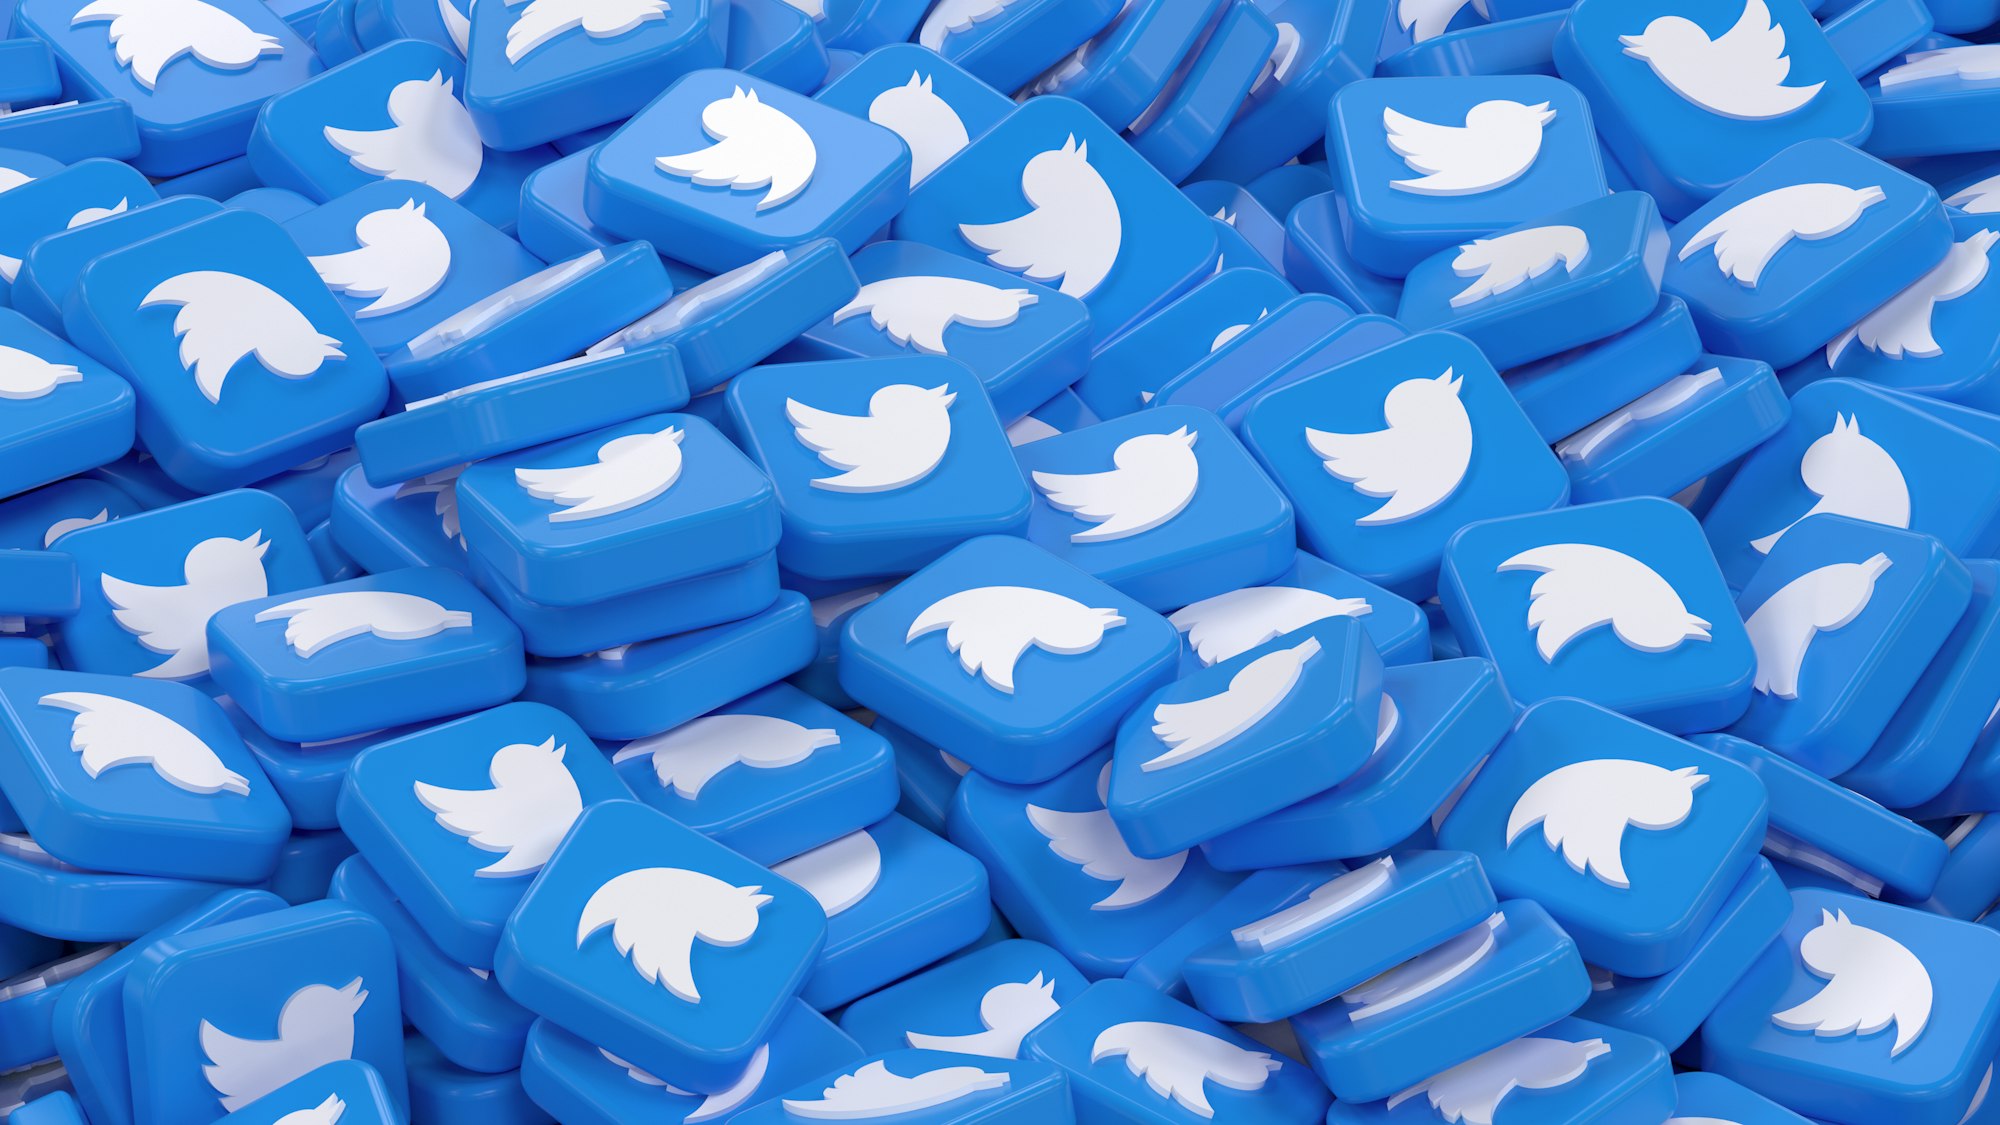 Twitter Users Are Finding Their Accounts Restricted Due To Site's "Spam Policy"